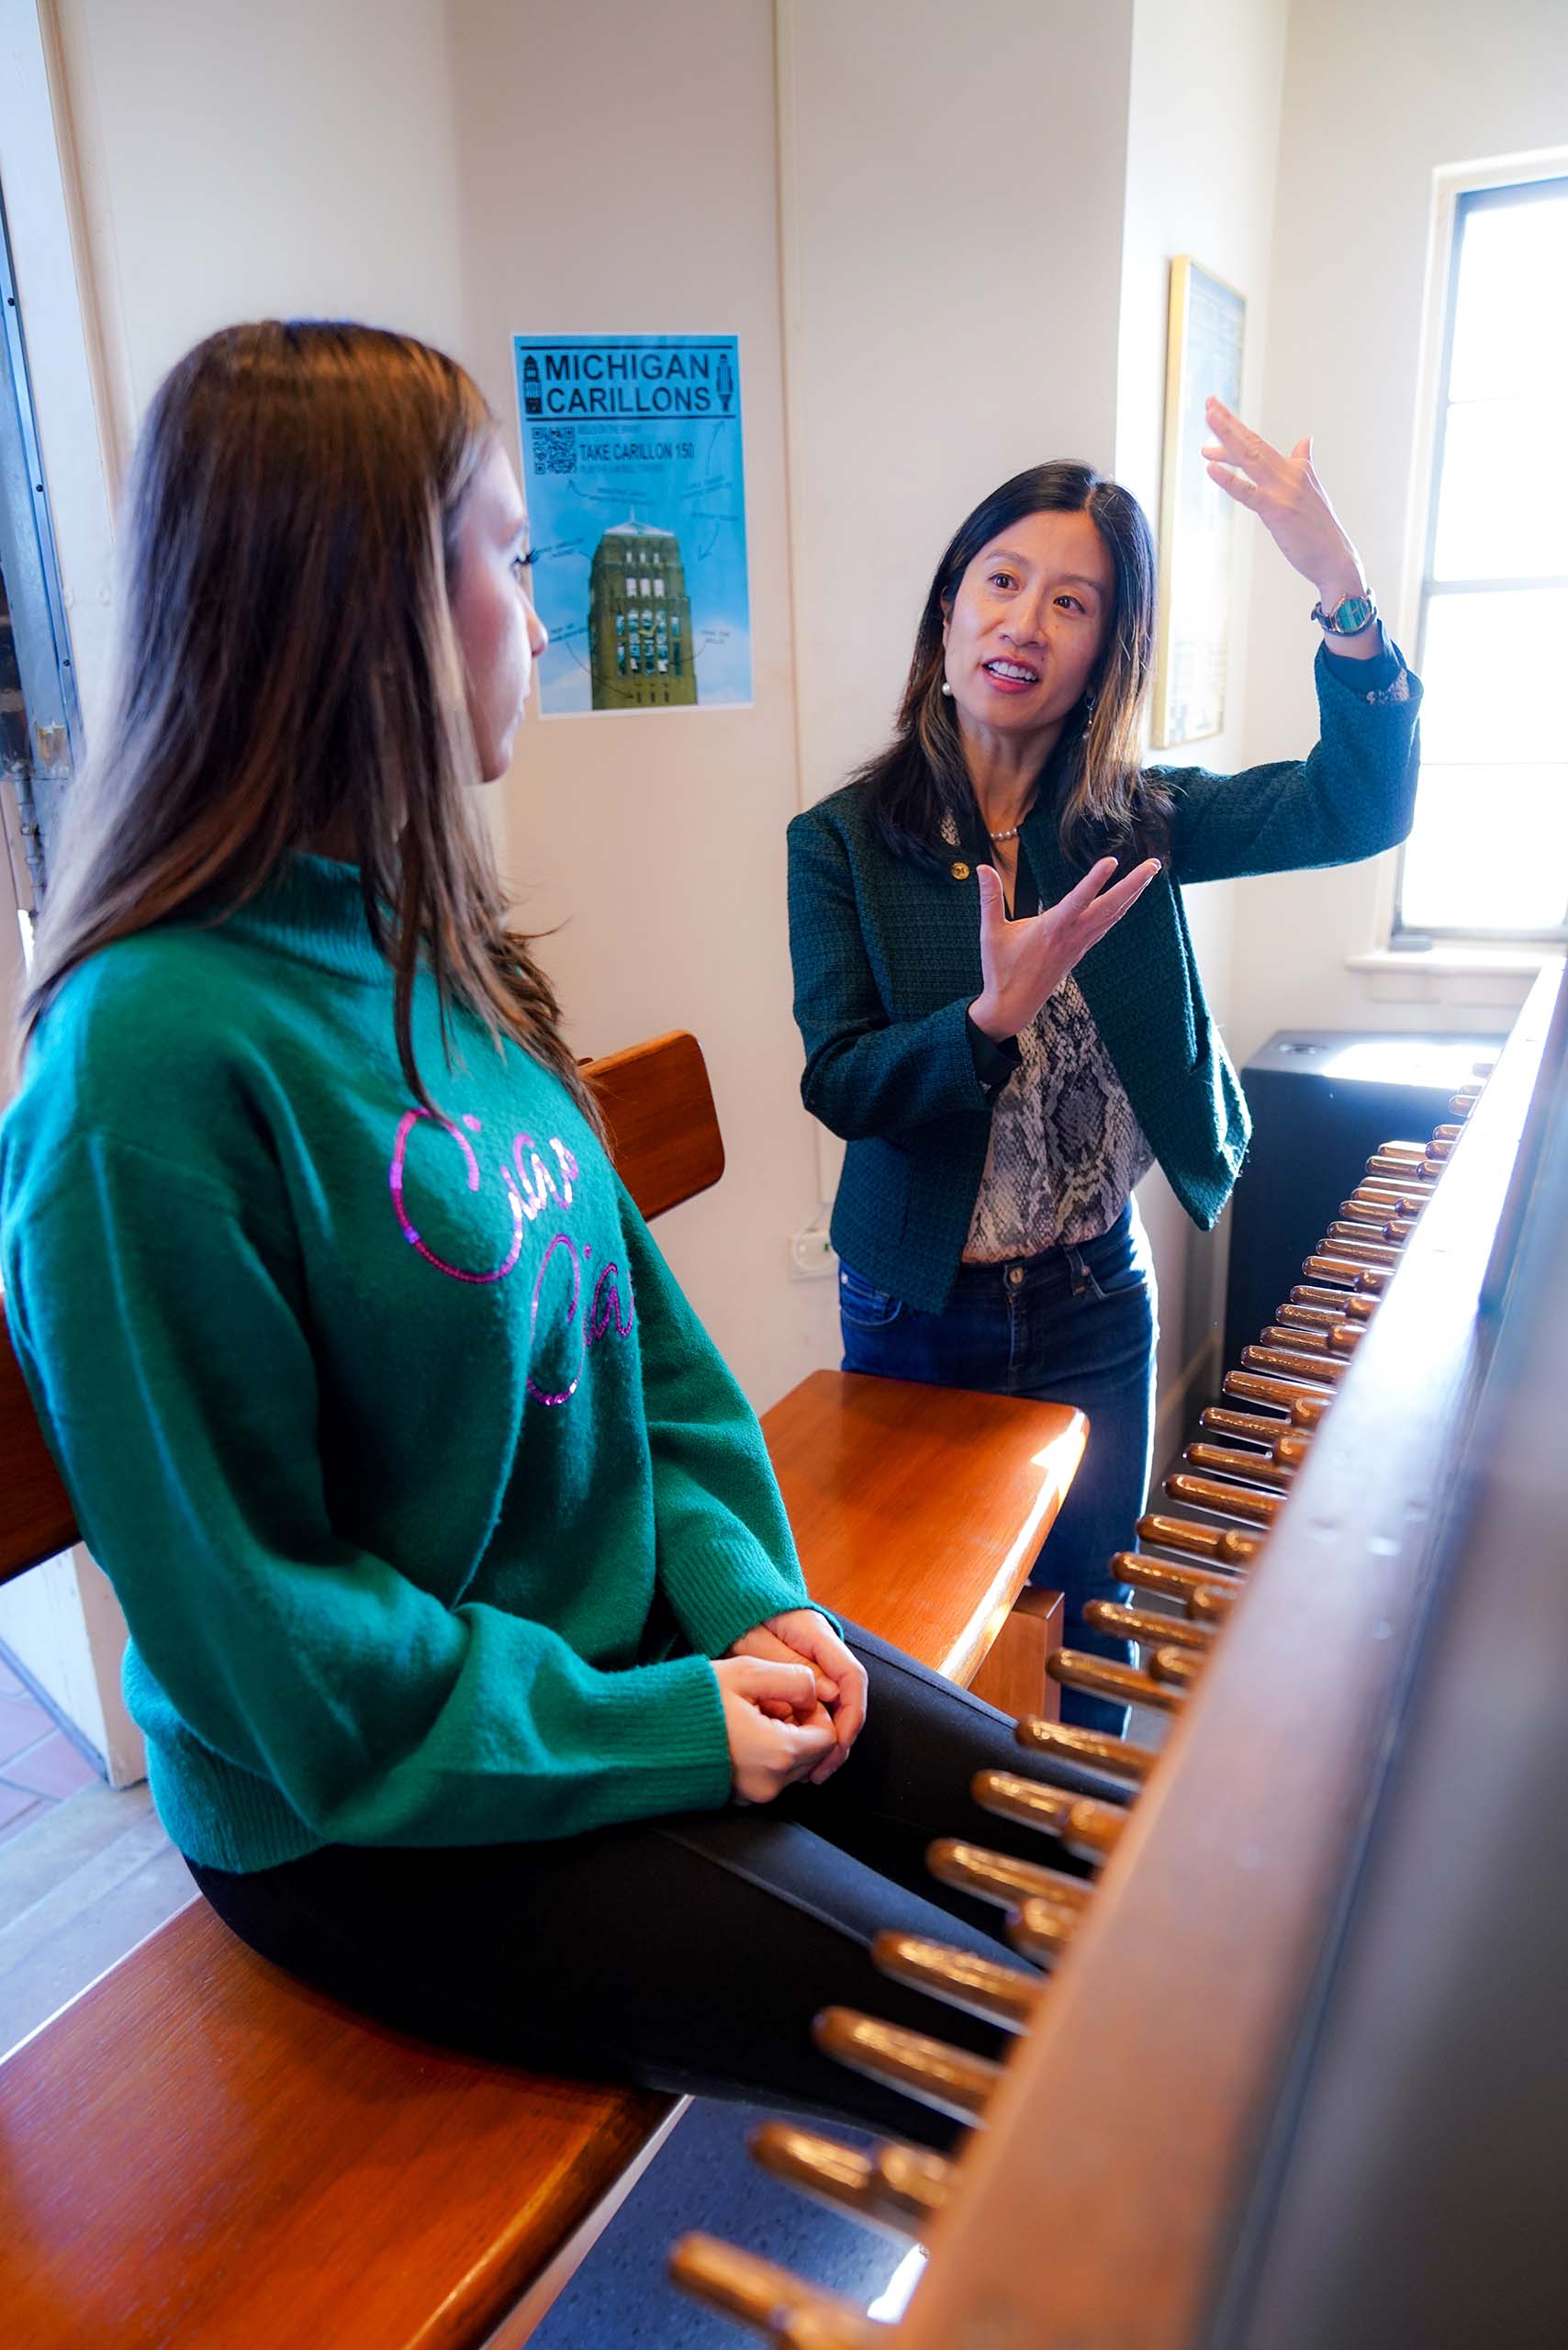 Teacher instructs a student at the carillon